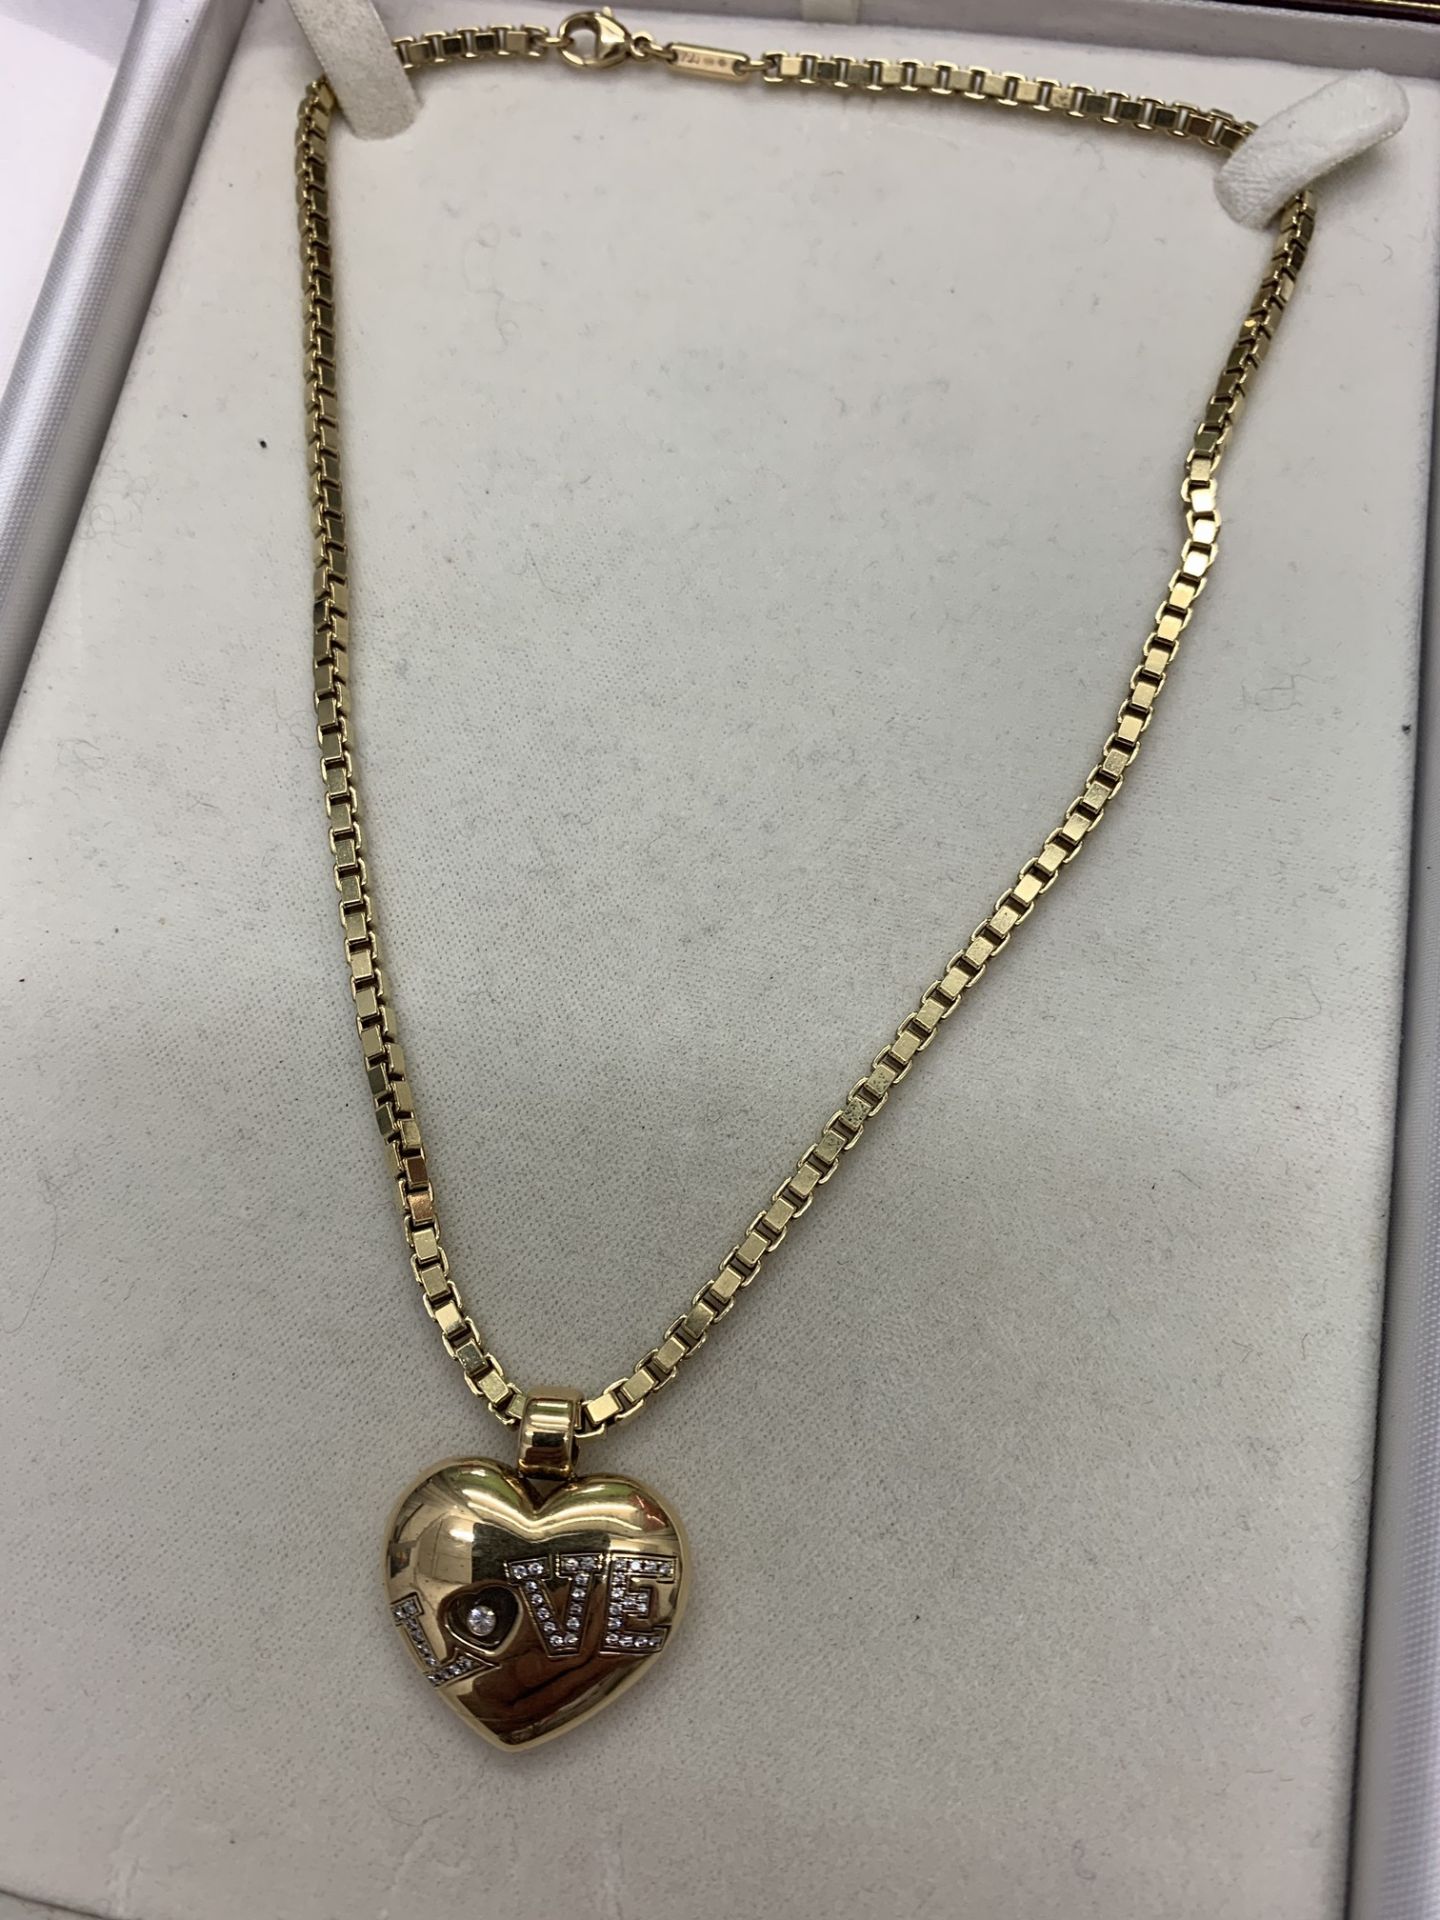 18ct GOLD CHOPARD DIAMOND HEART NECKLACE & CHAIN 44 grams - Image 2 of 4